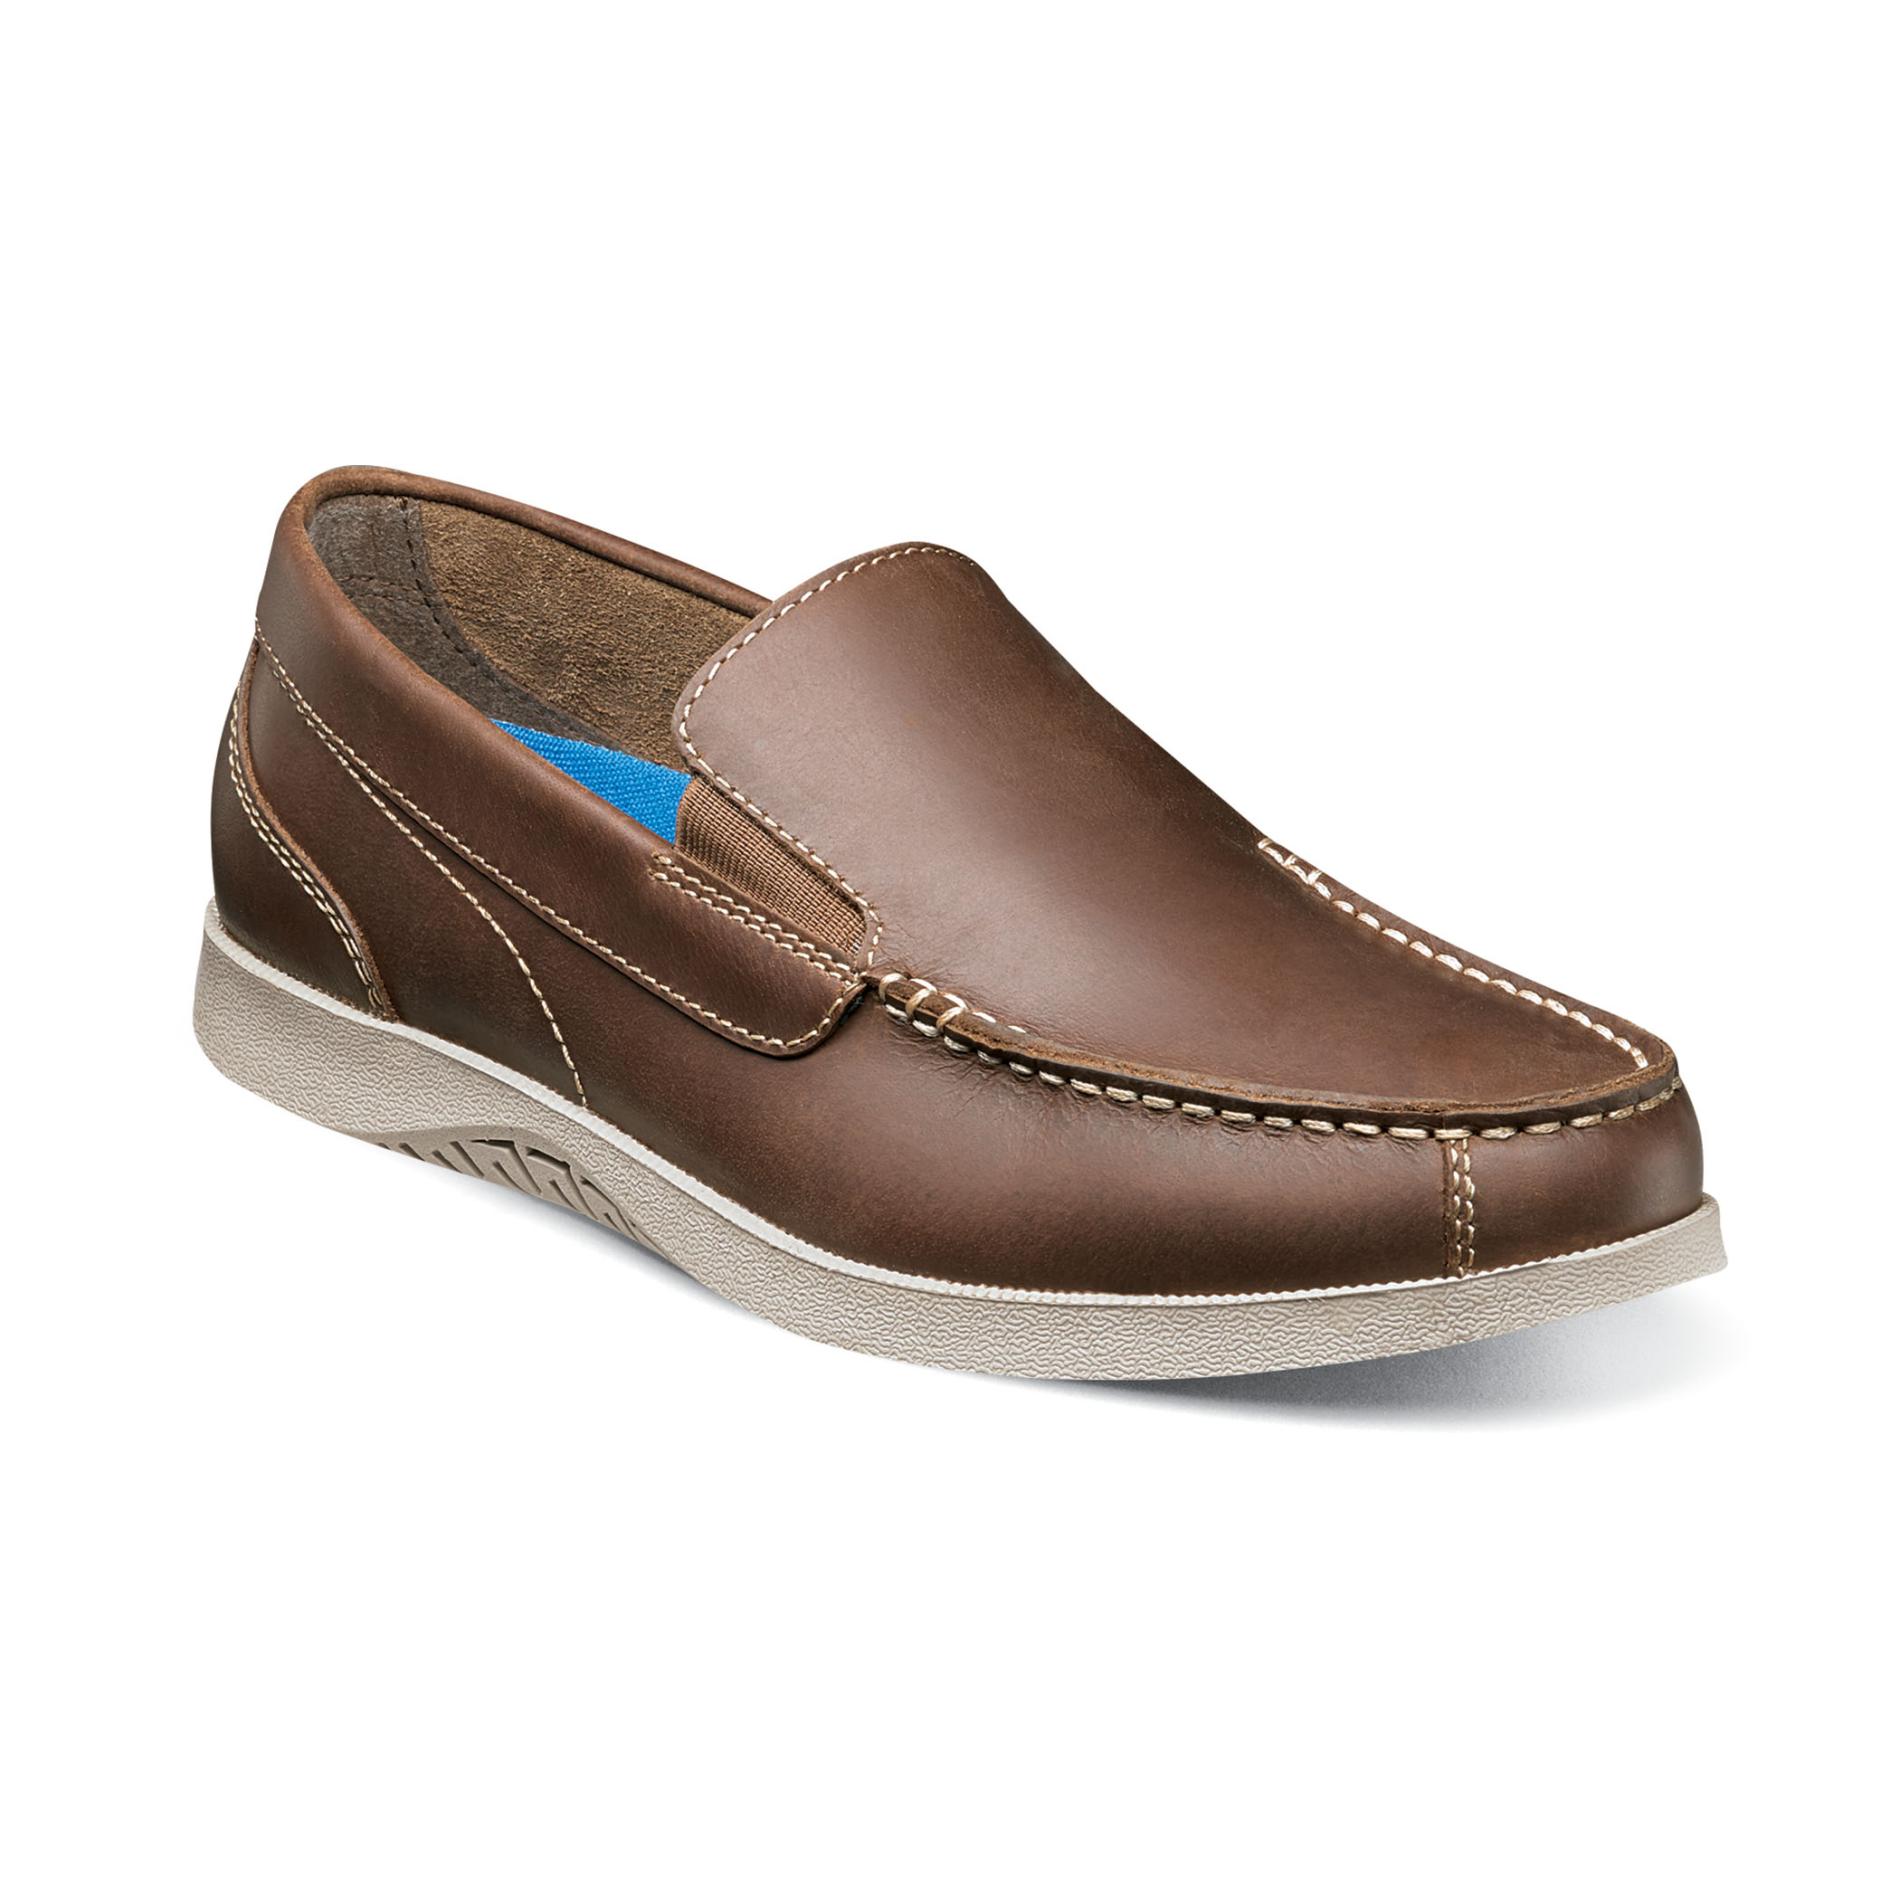 Men's Casual Shoes - Sears